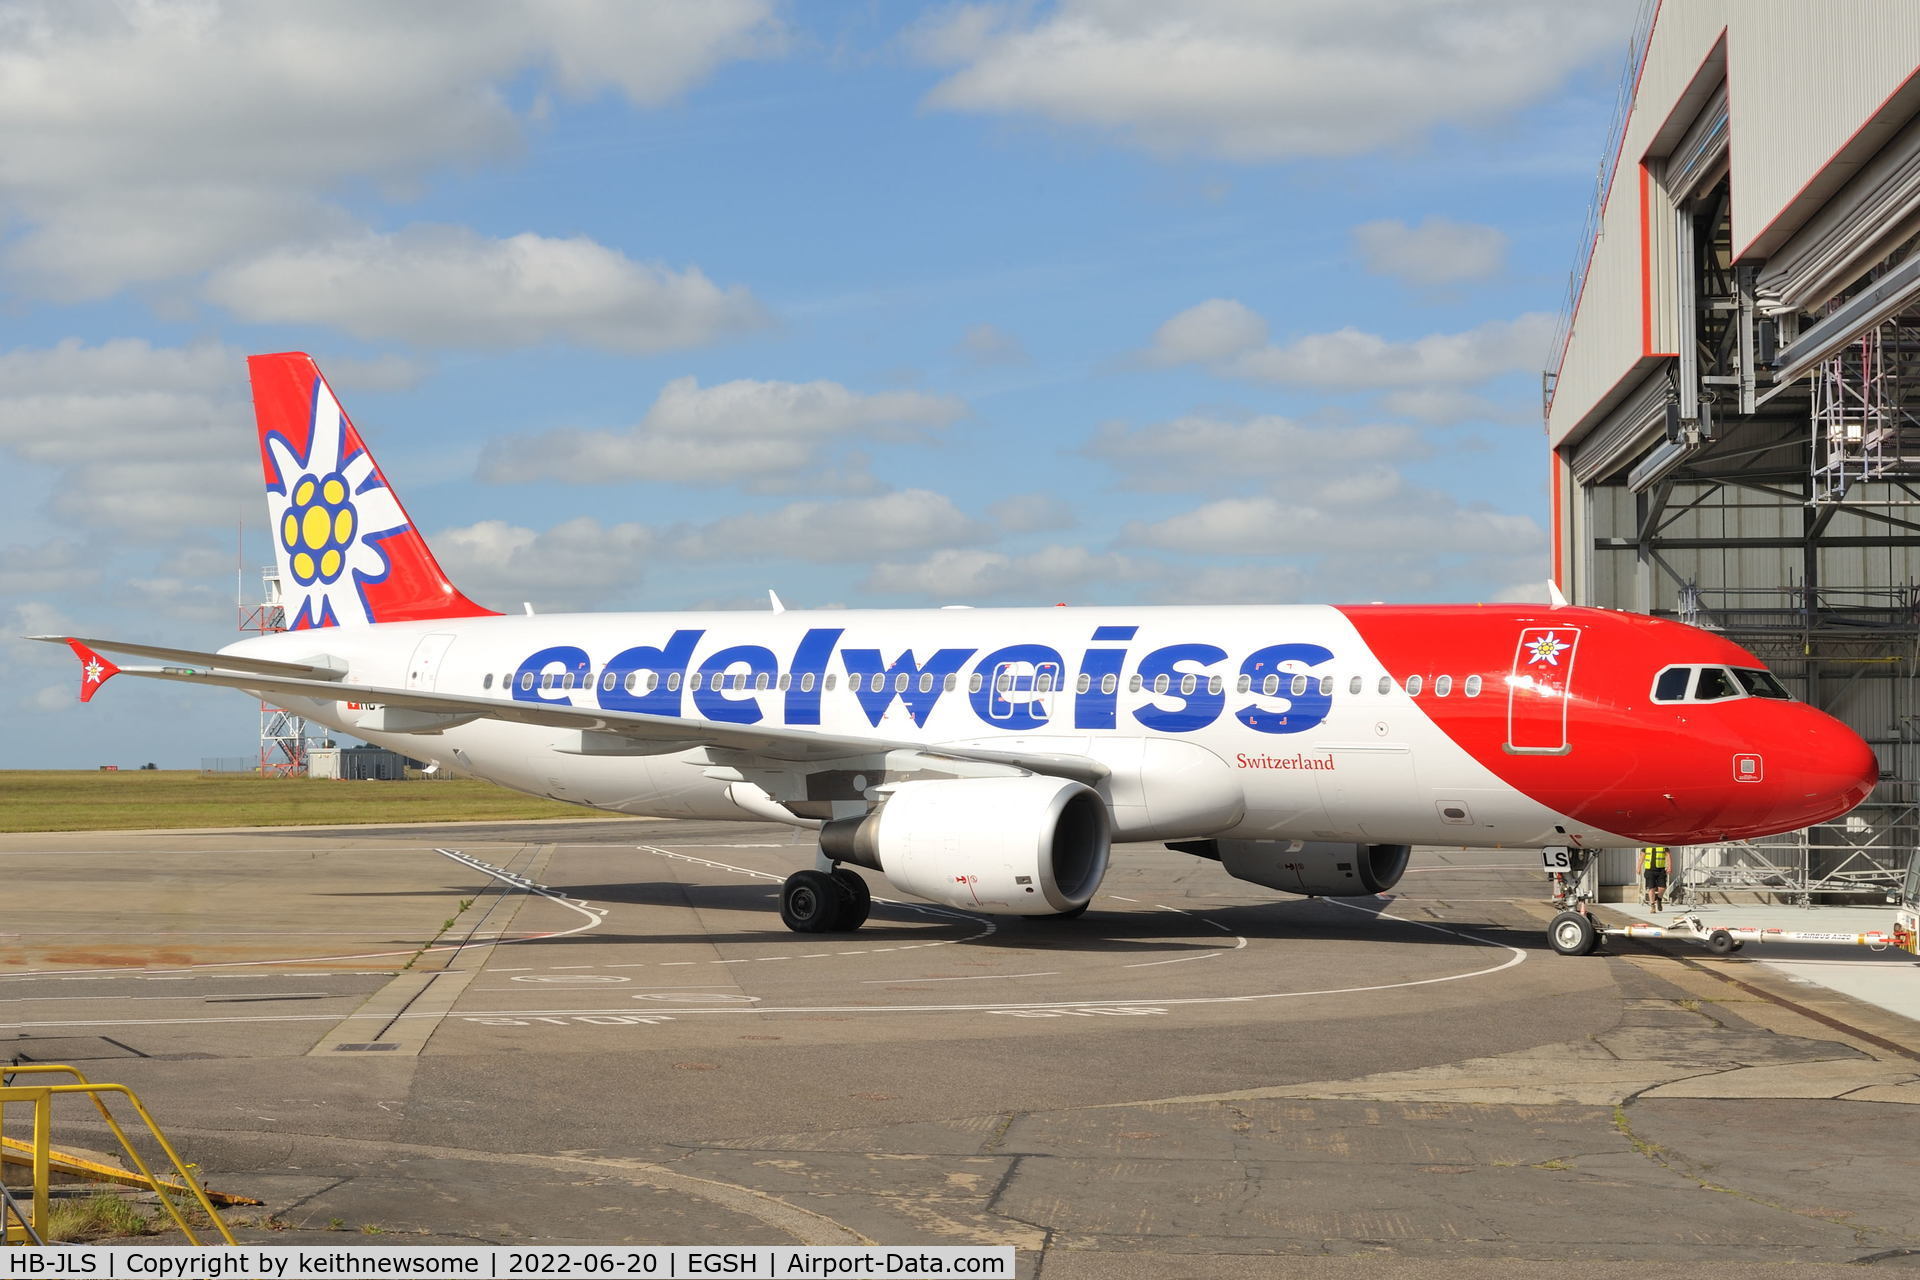 HB-JLS, 2012 Airbus A320-214 C/N 5069, Removed from spray shop with Edelweiss colour scheme.